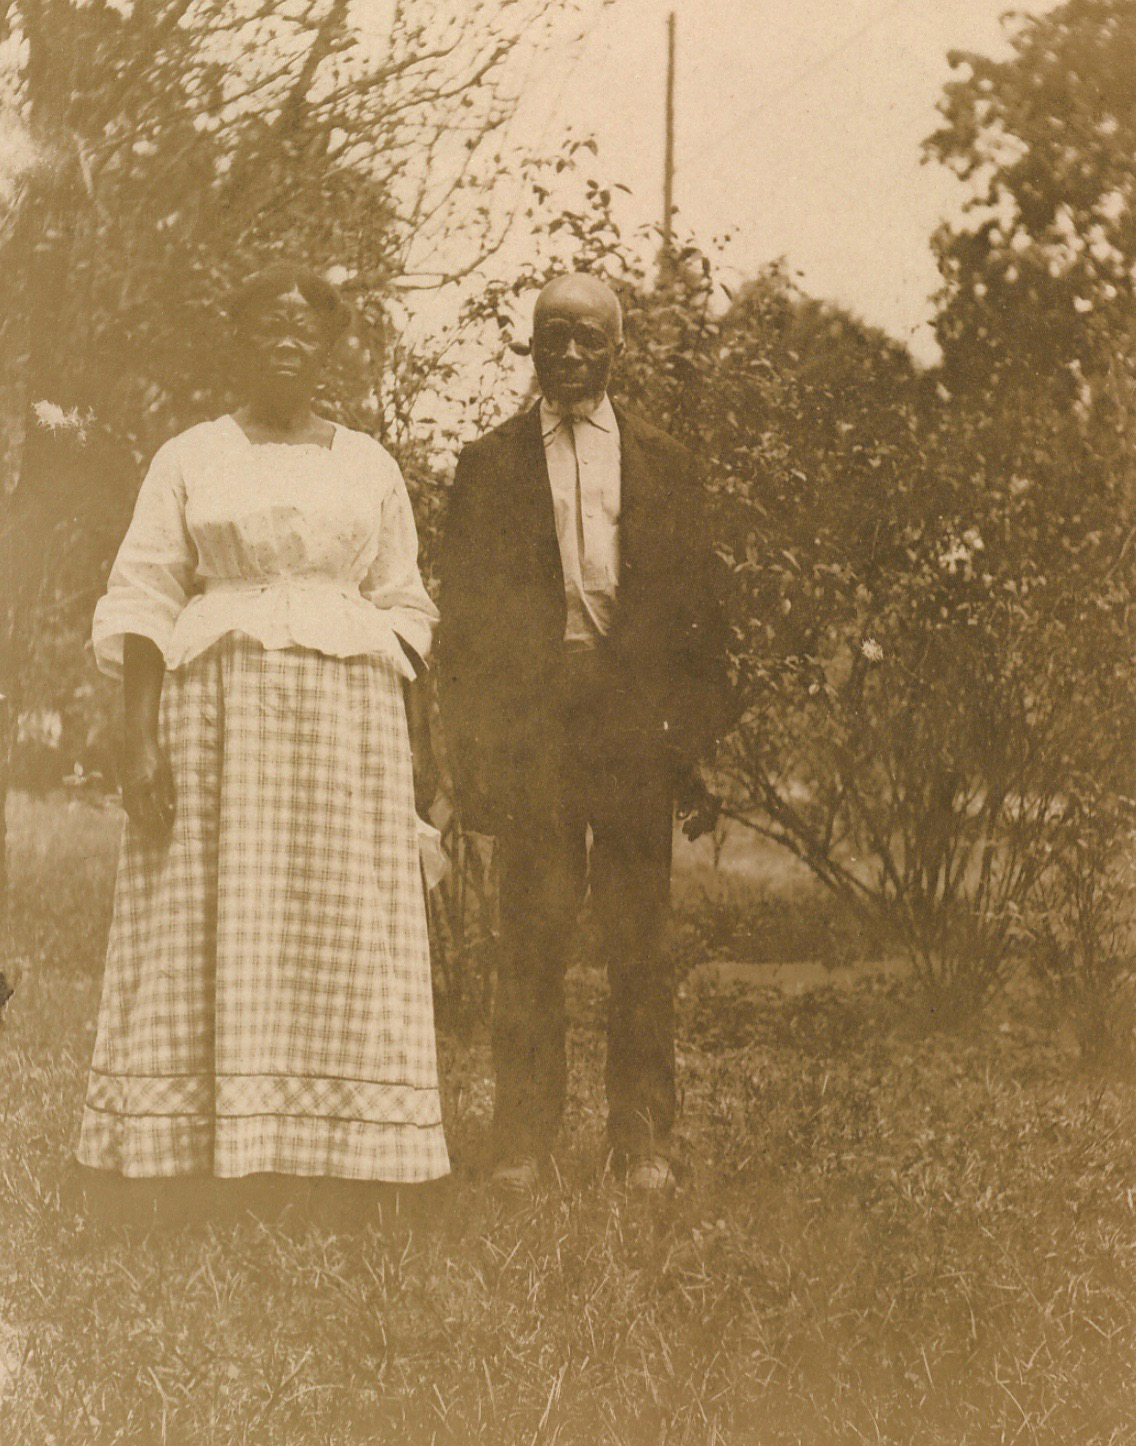 Cudjo Lewis and his wife Abache in Africatown (photograph courtesy of the Mobile Public Library)